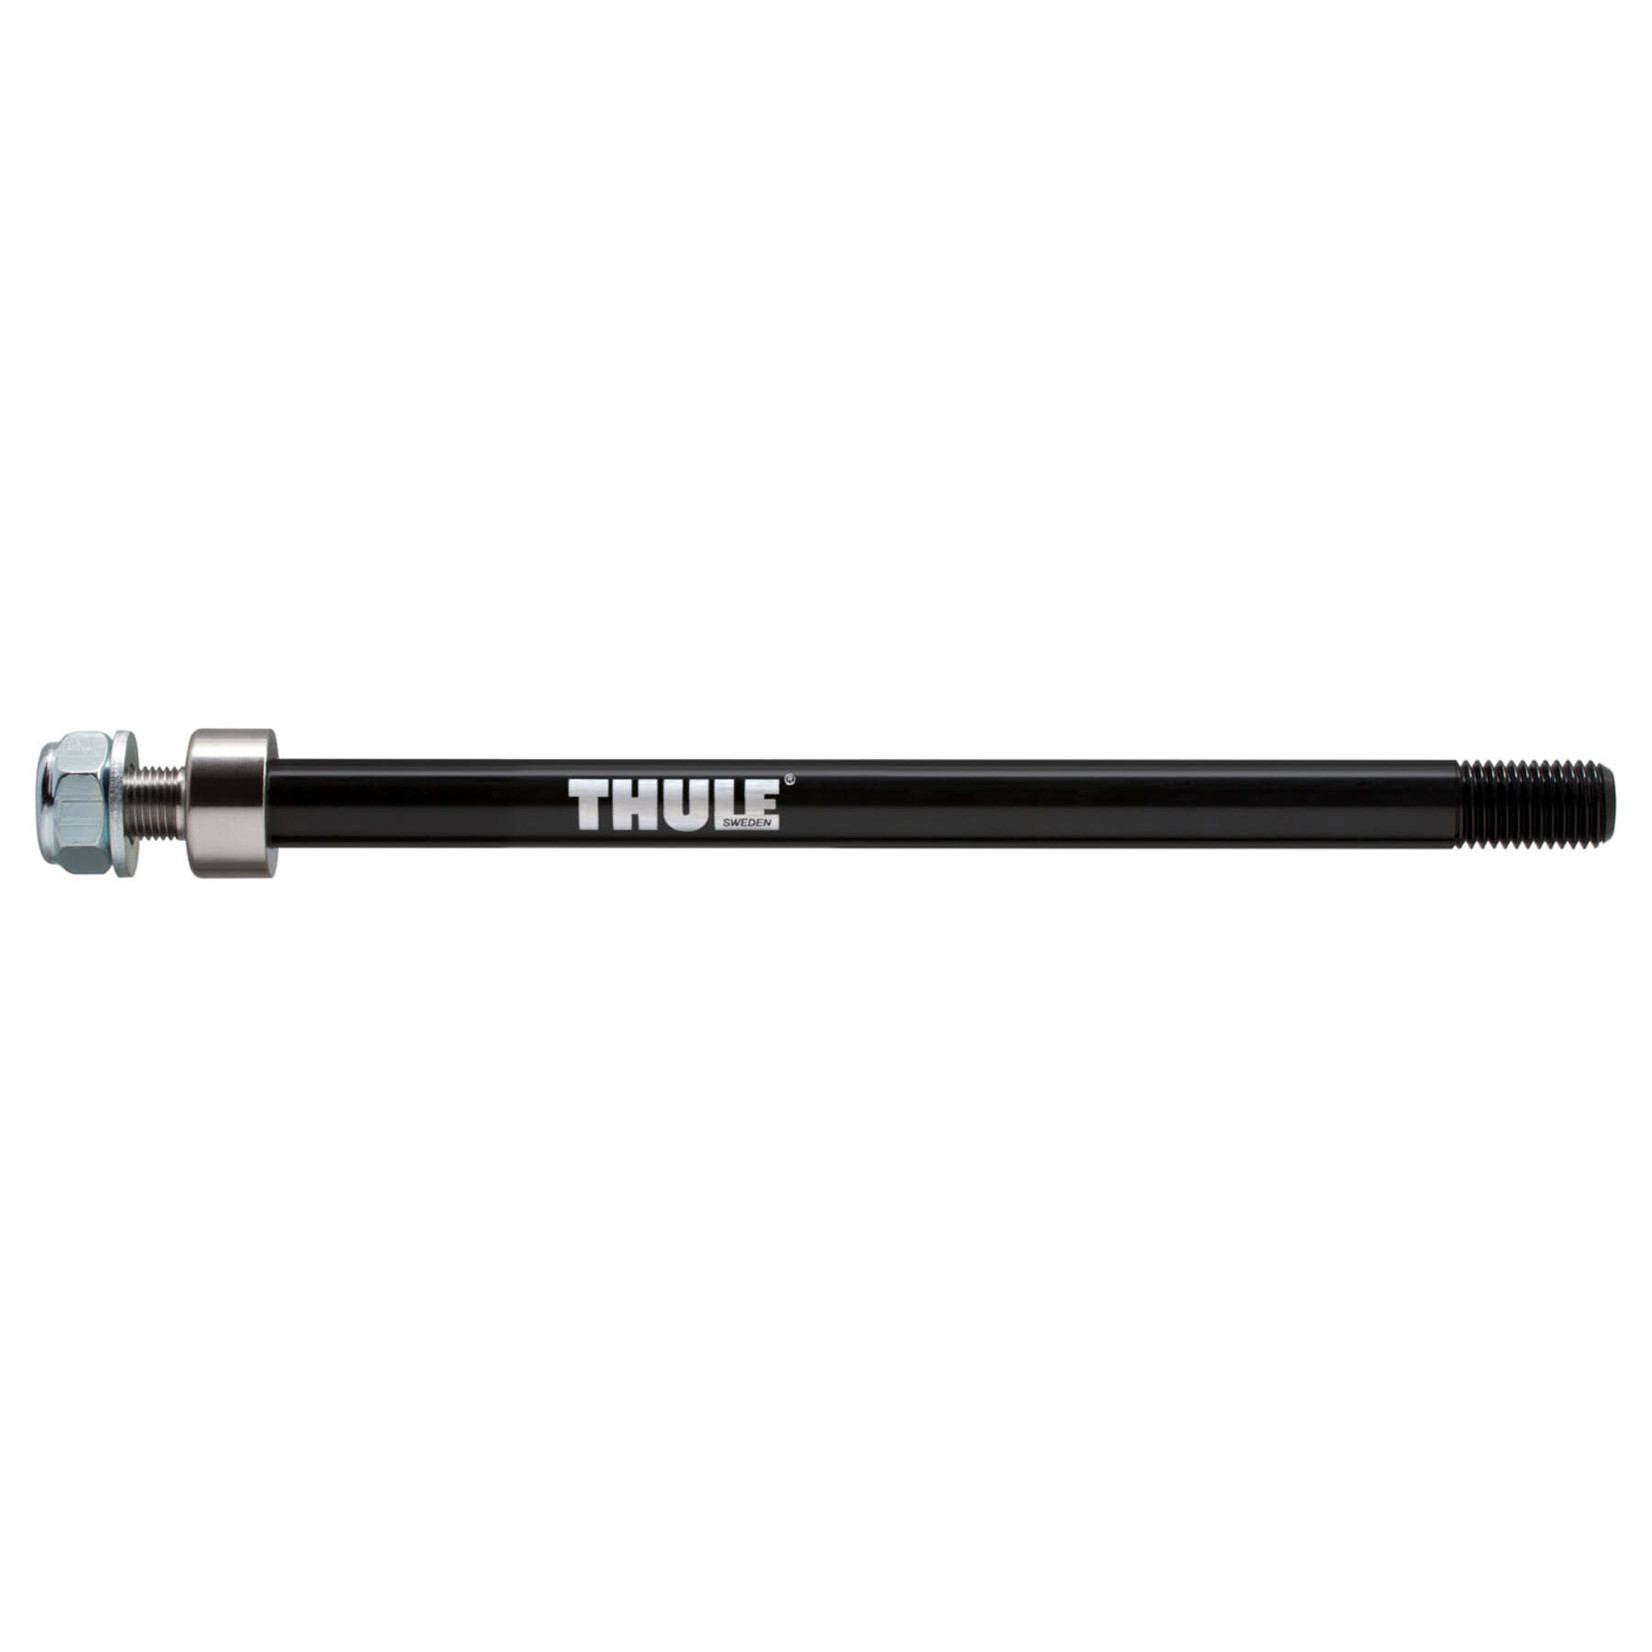 Thule Thule Thru Axle Syntace (M12 x 1.0) Adapter 217 or 229mm 20110737 - Black